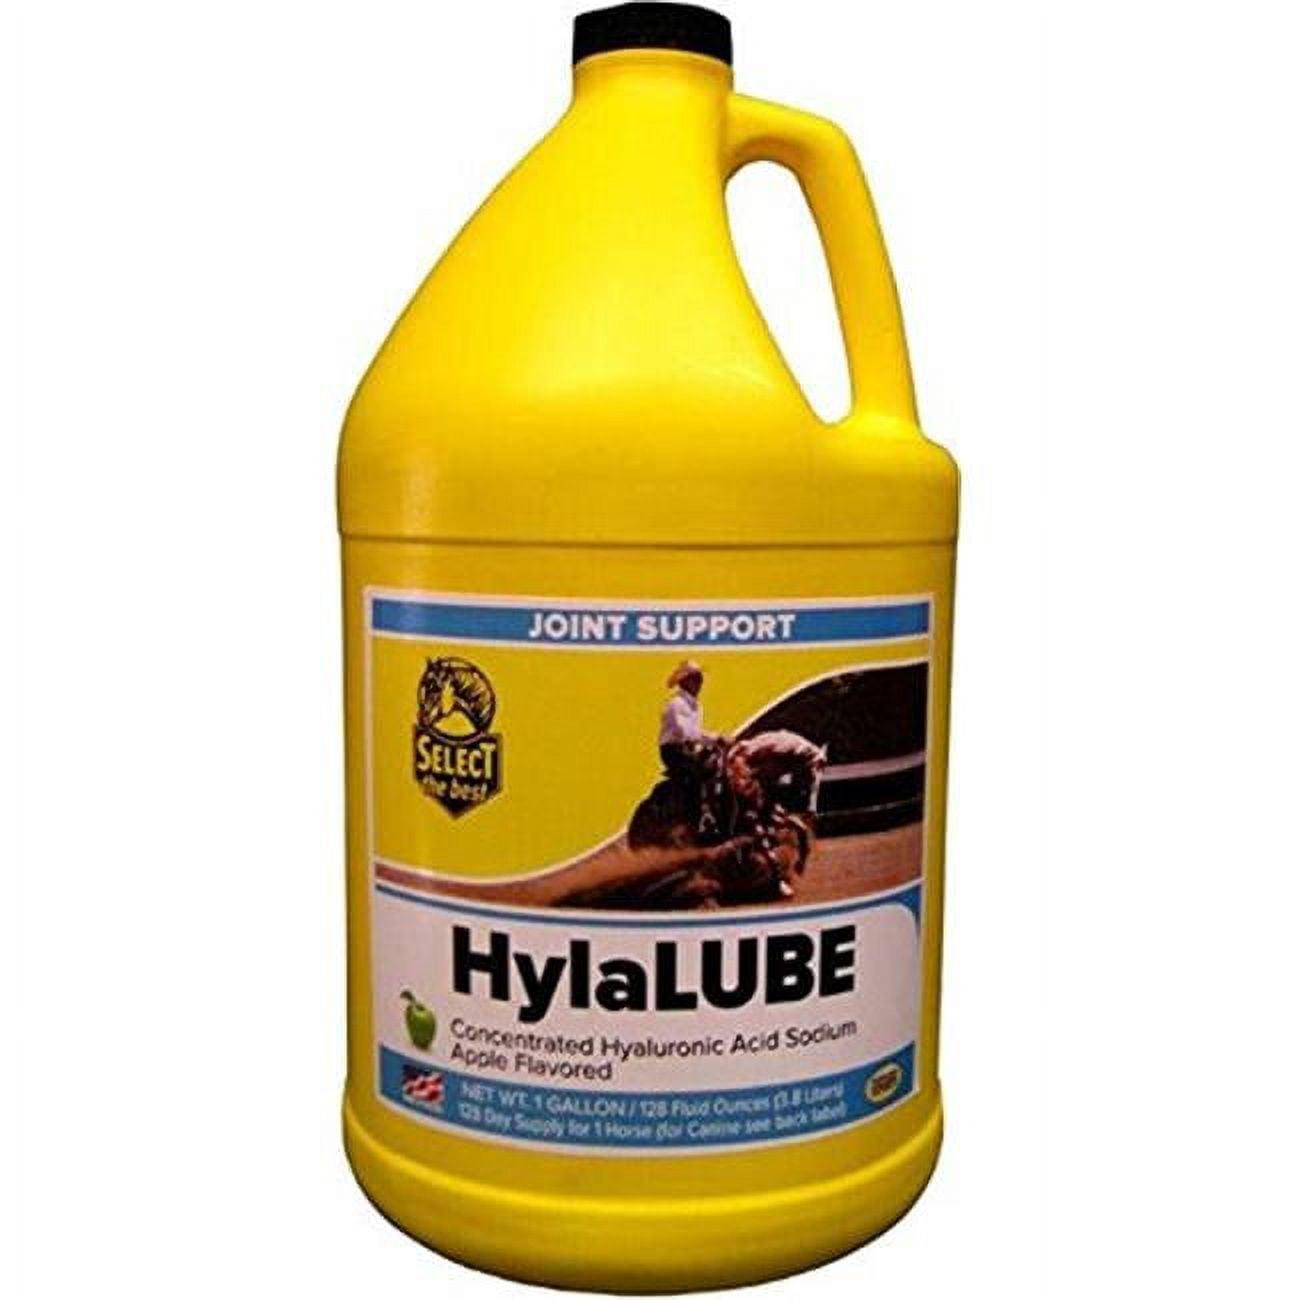 Picture of Richdel 974814 32 oz Hylalube Concentrate - Apple